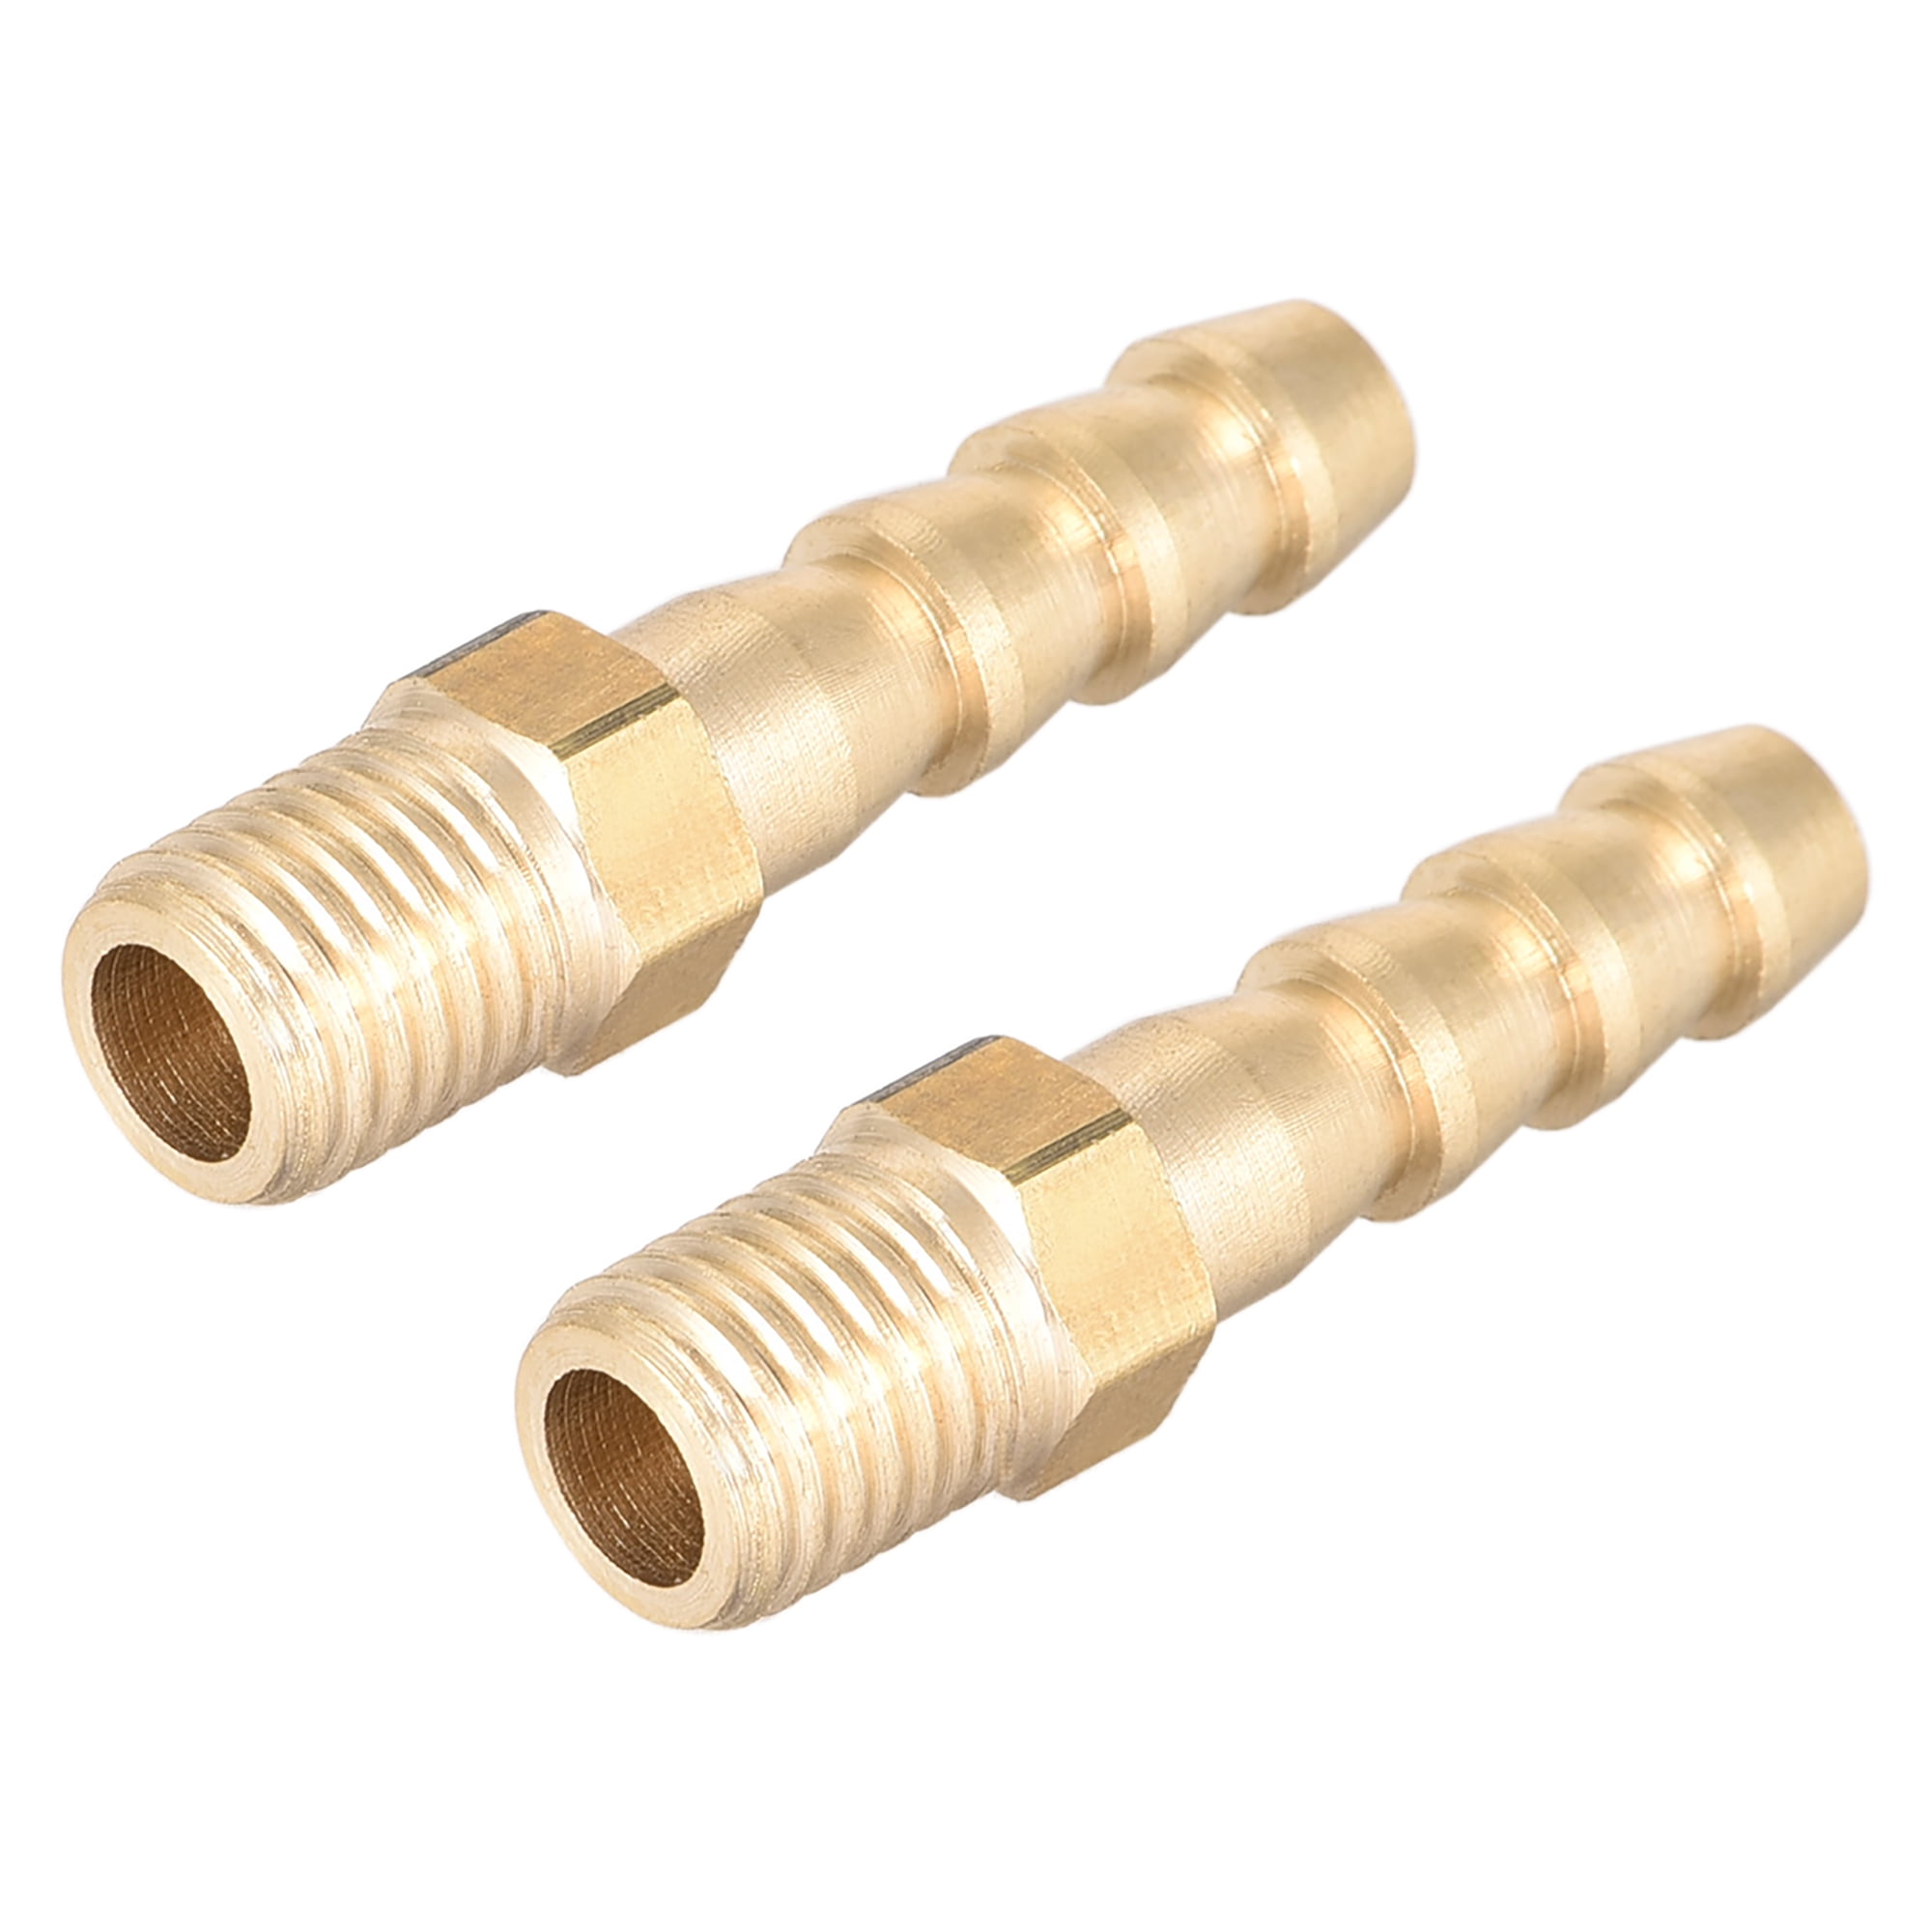 Brass Push fit Tube Coupling Straight Metric 6mm Pack of 5 